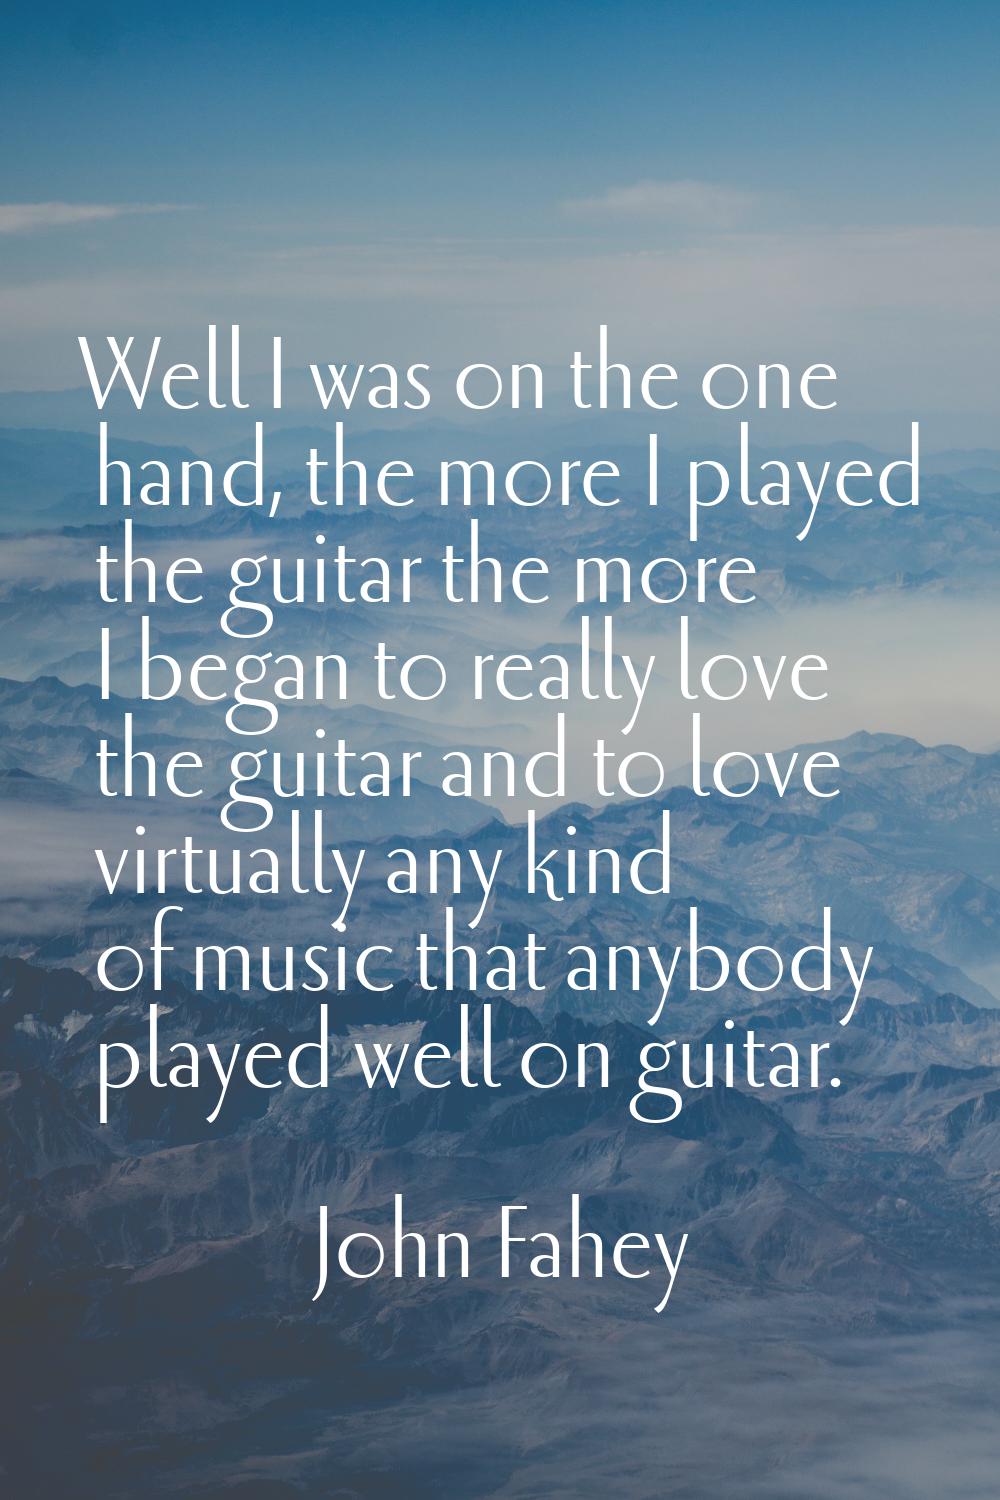 Well I was on the one hand, the more I played the guitar the more I began to really love the guitar